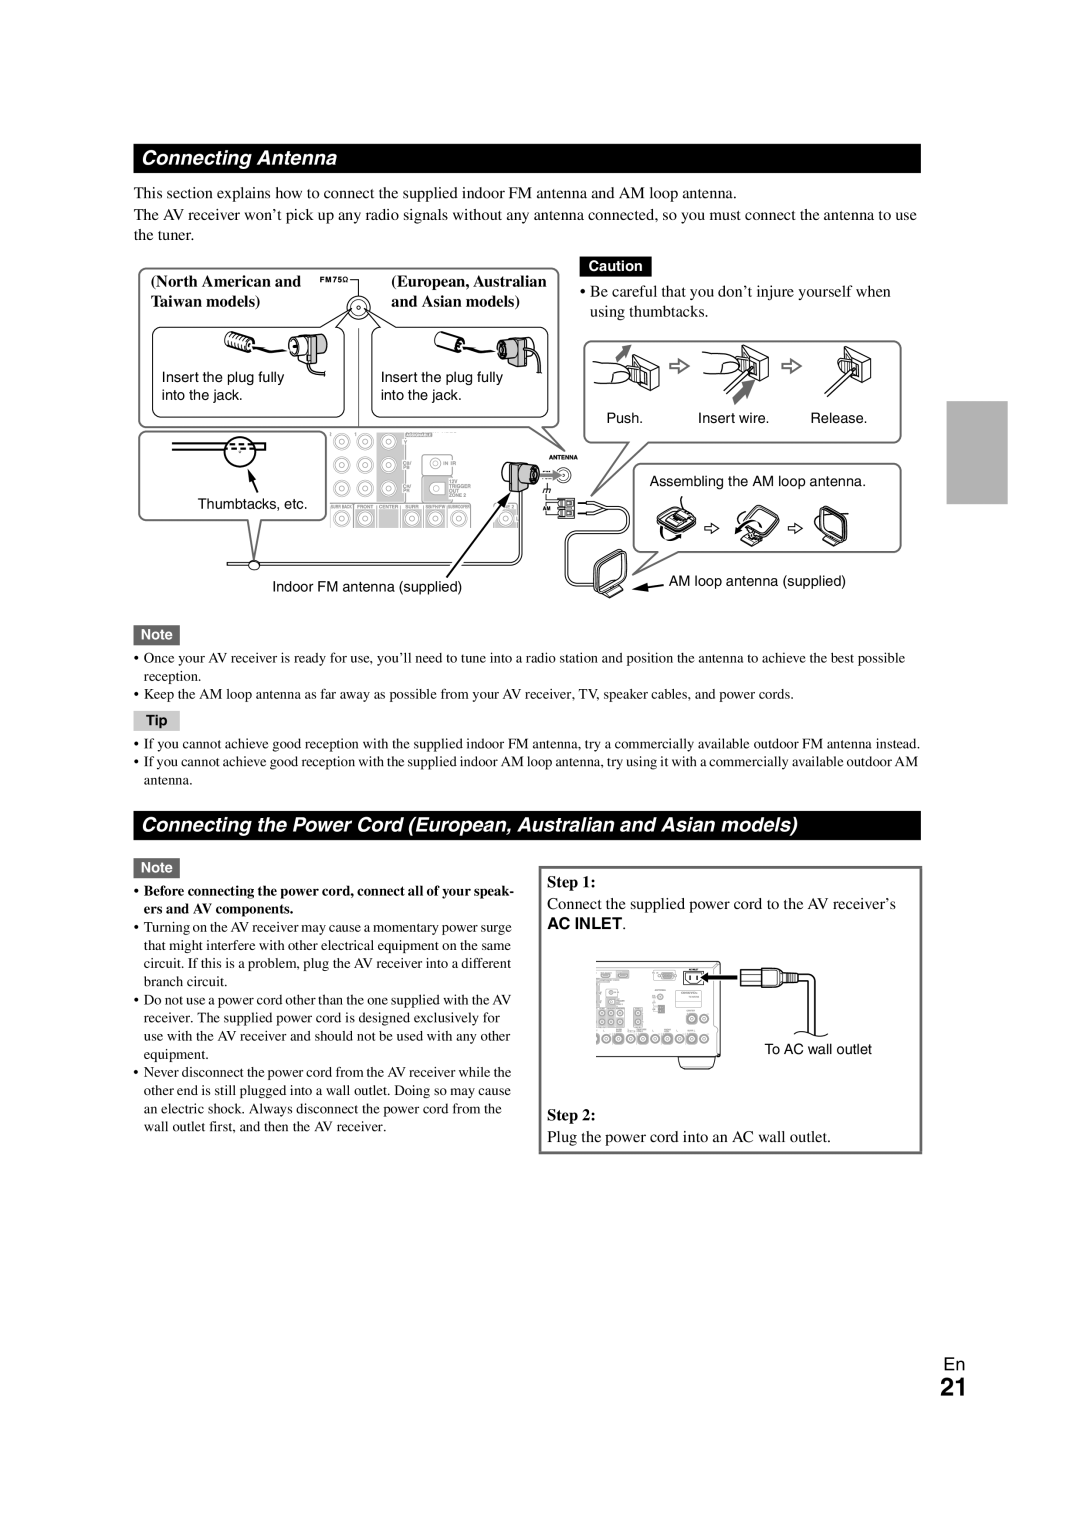 Onkyo TX-NR708 instruction manual Connecting Antenna, Ac Inlet 